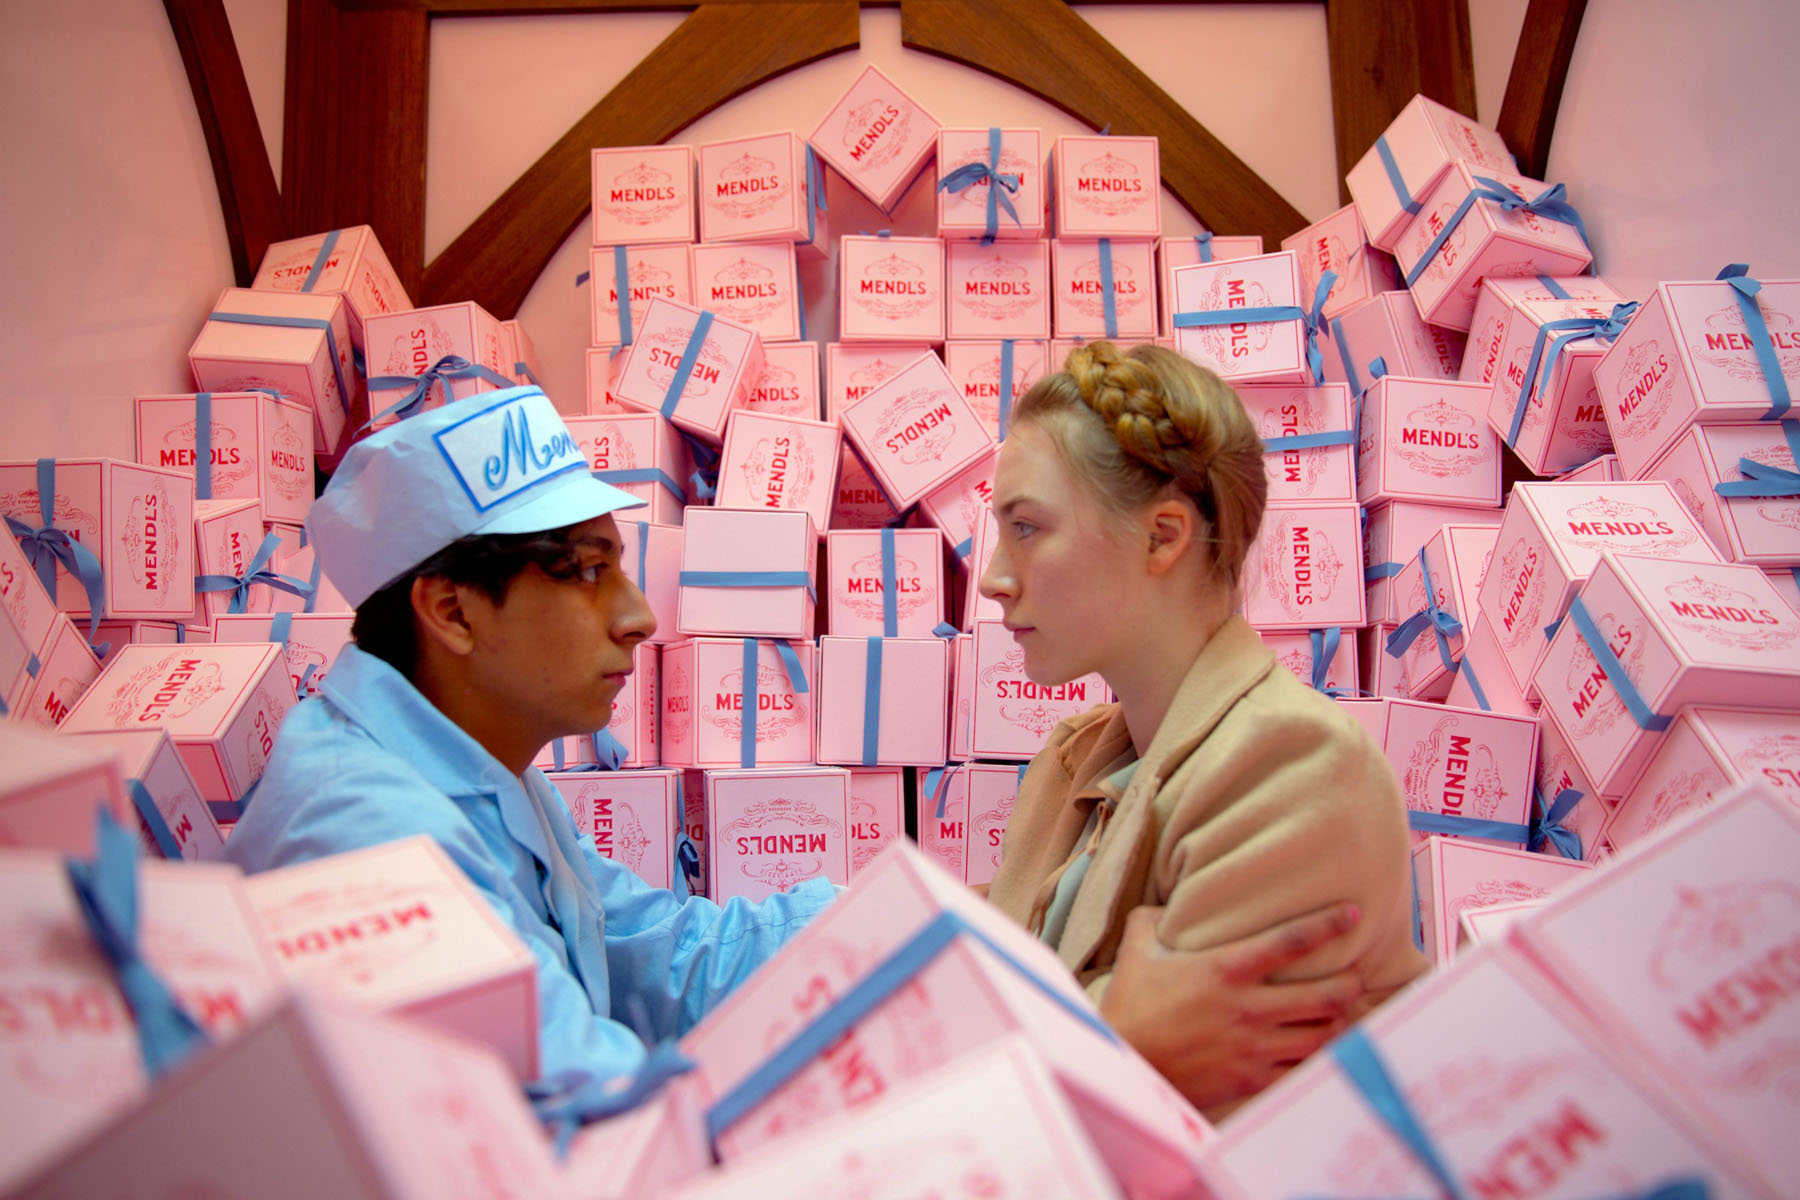 Win ‘The Grand Budapest Hotel’ on Blu-ray